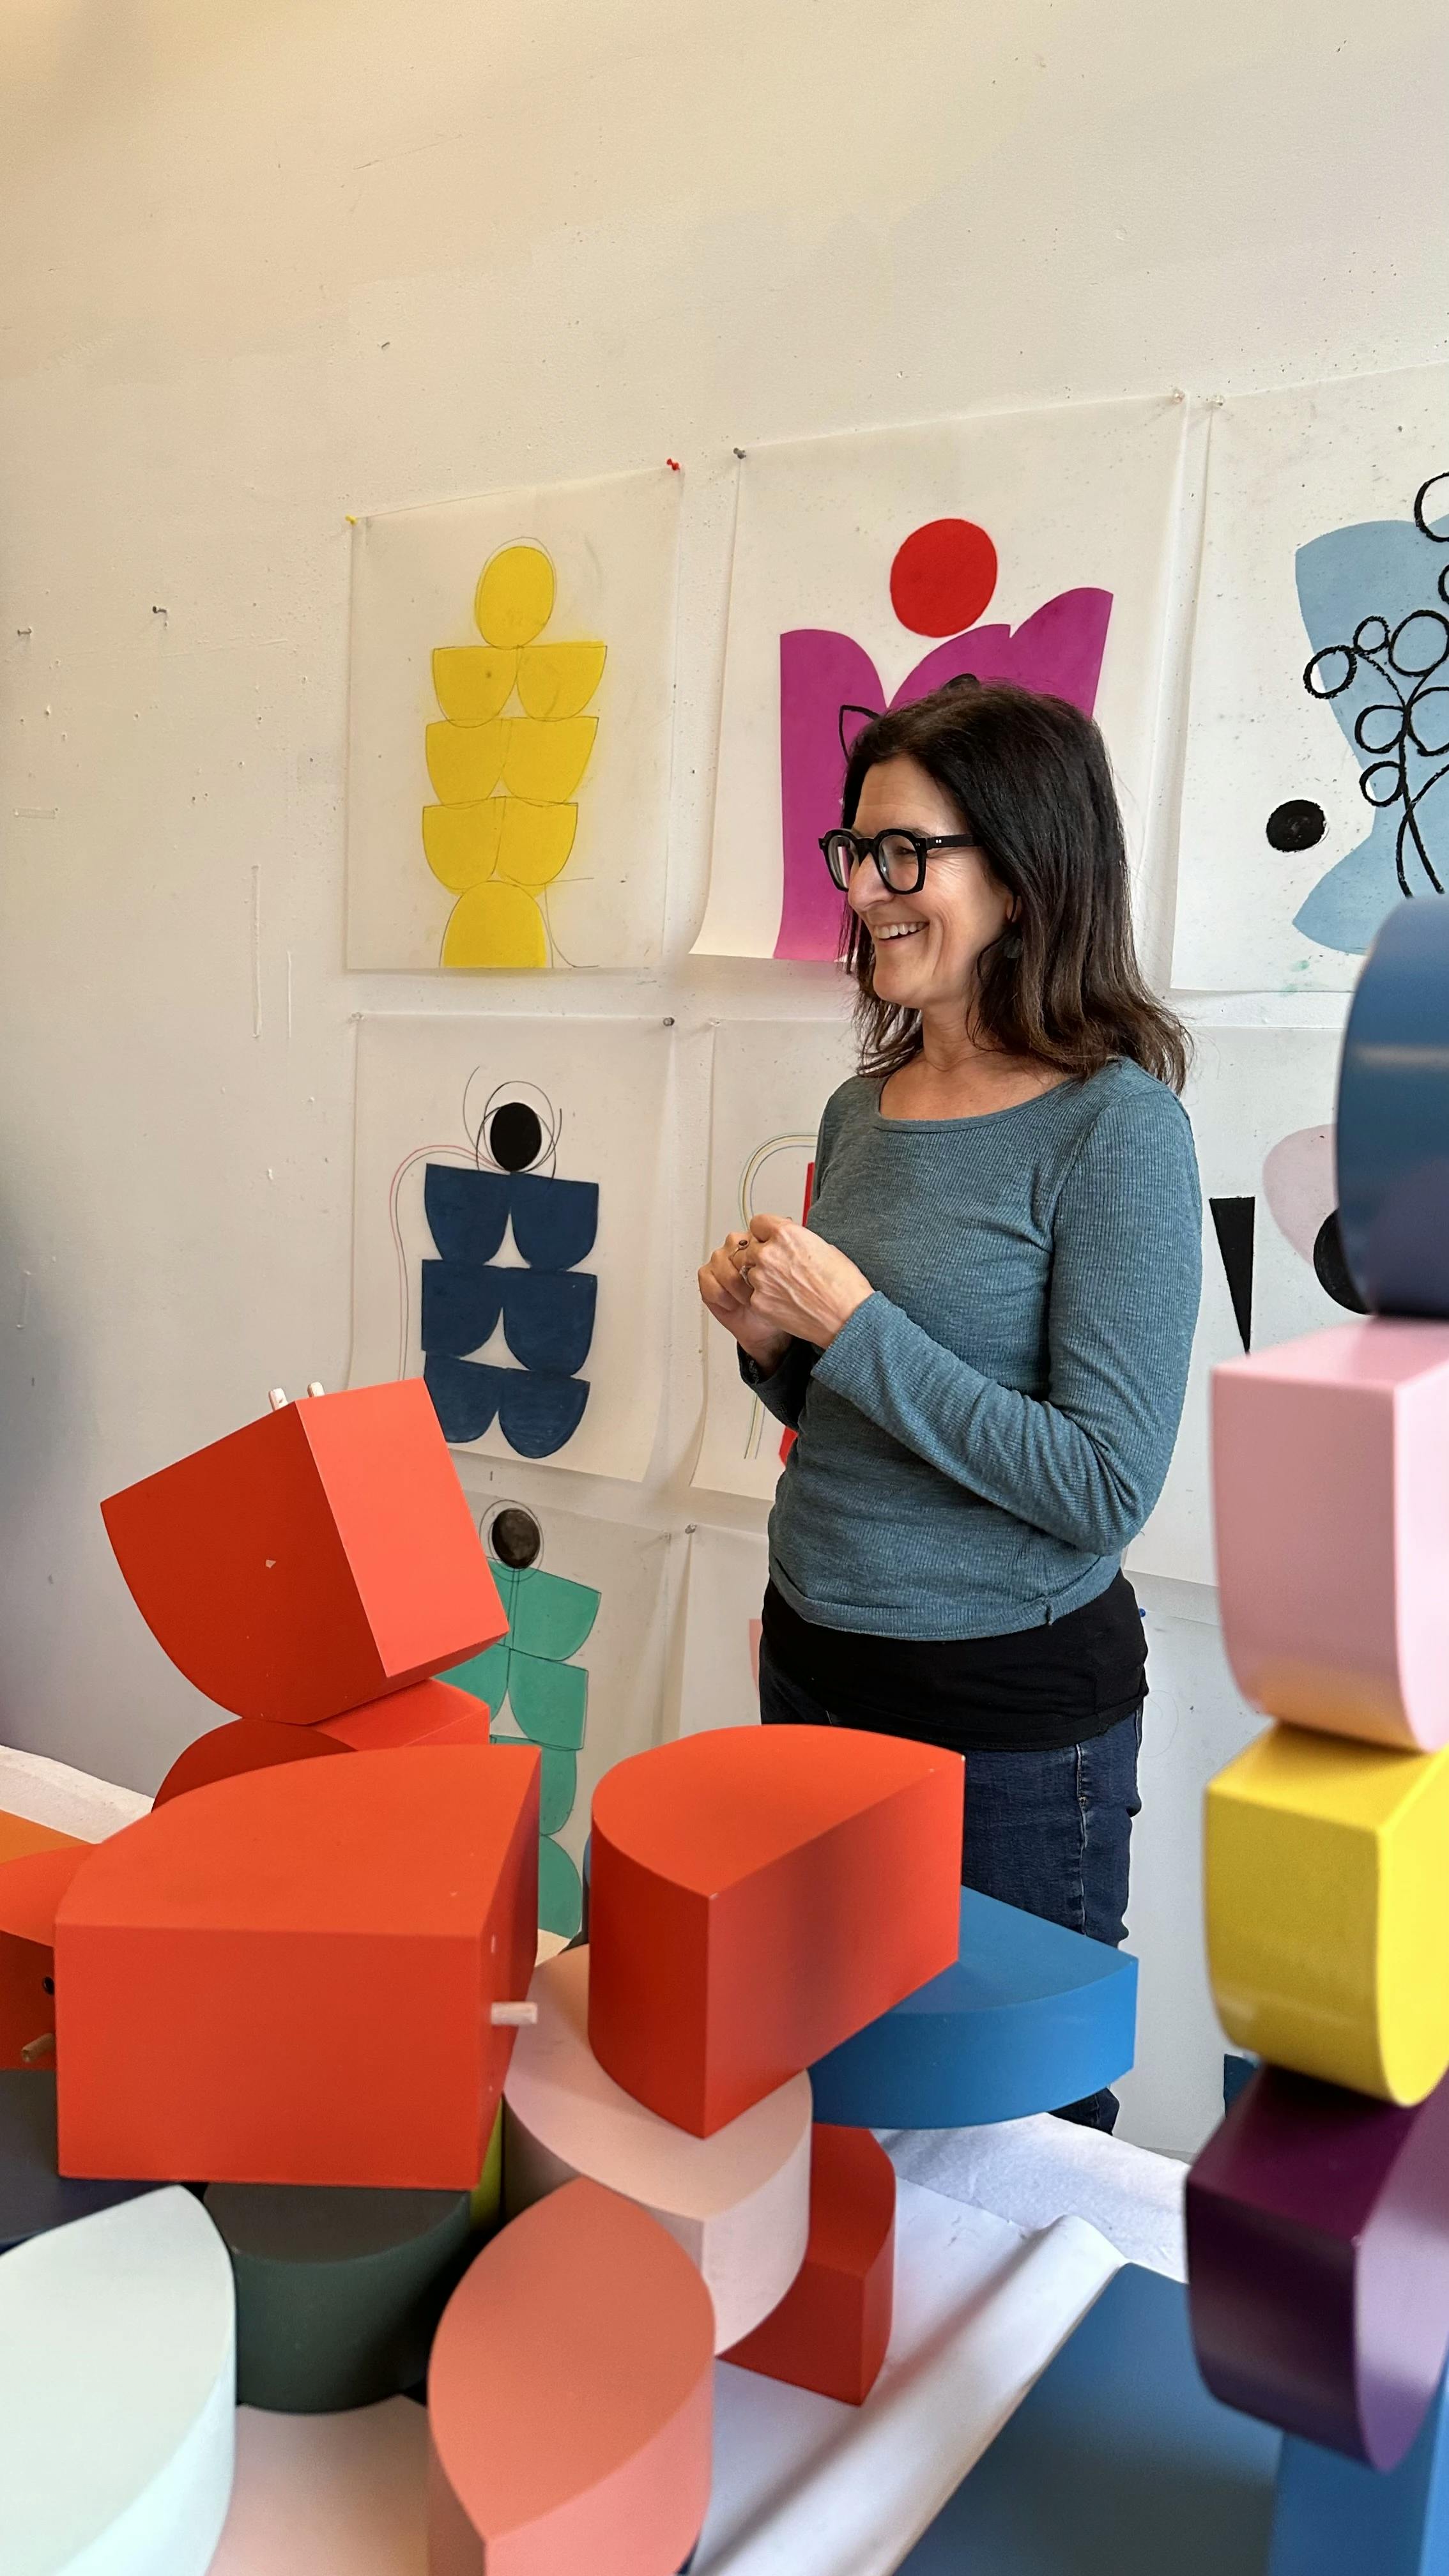 Artist Vicki Sher standing next to a pile of colorful, aluminum sculpture pieces.